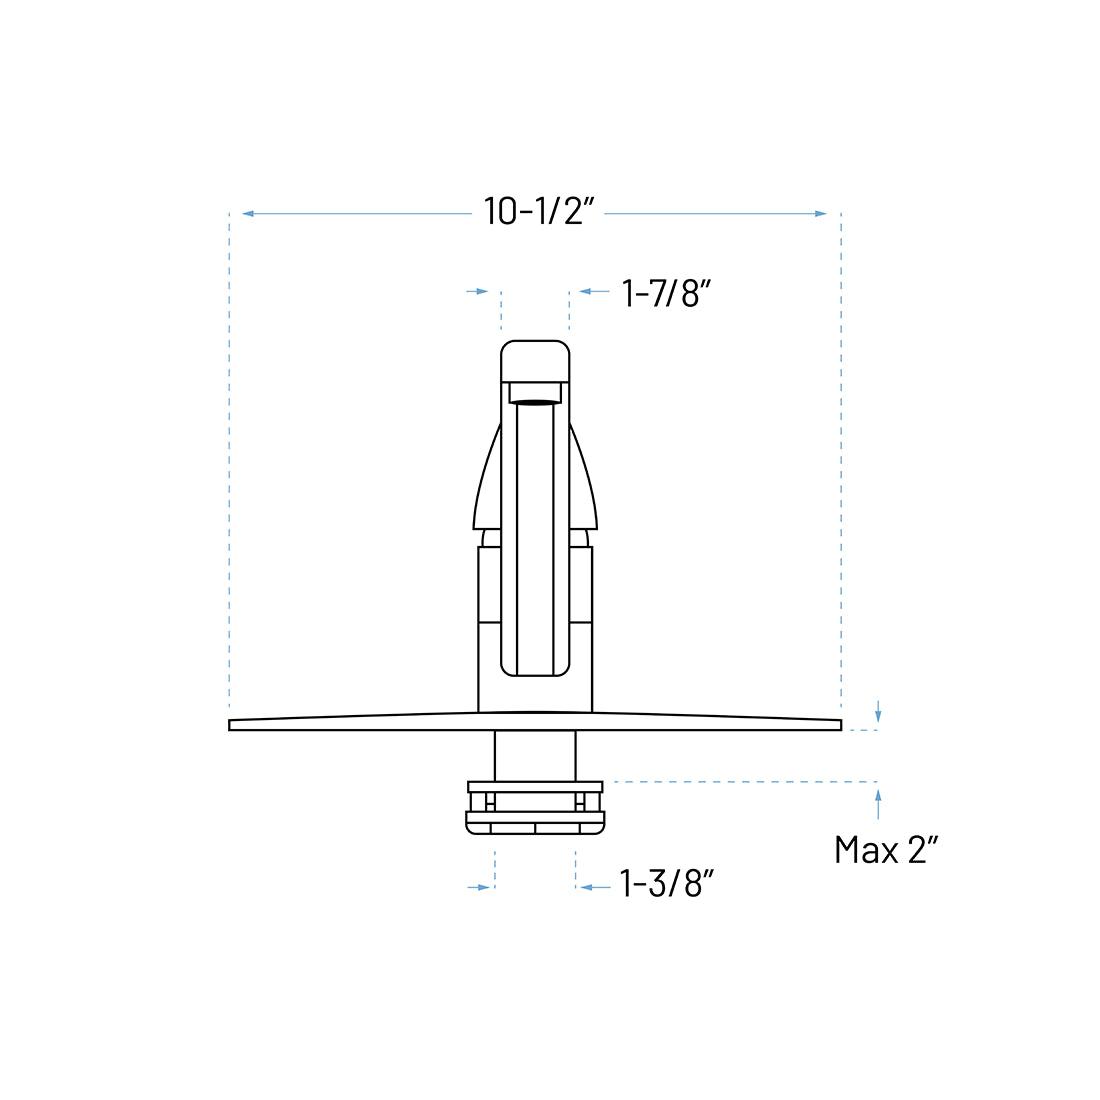 Technical Drawing of a Single Handle Kitchen Faucet